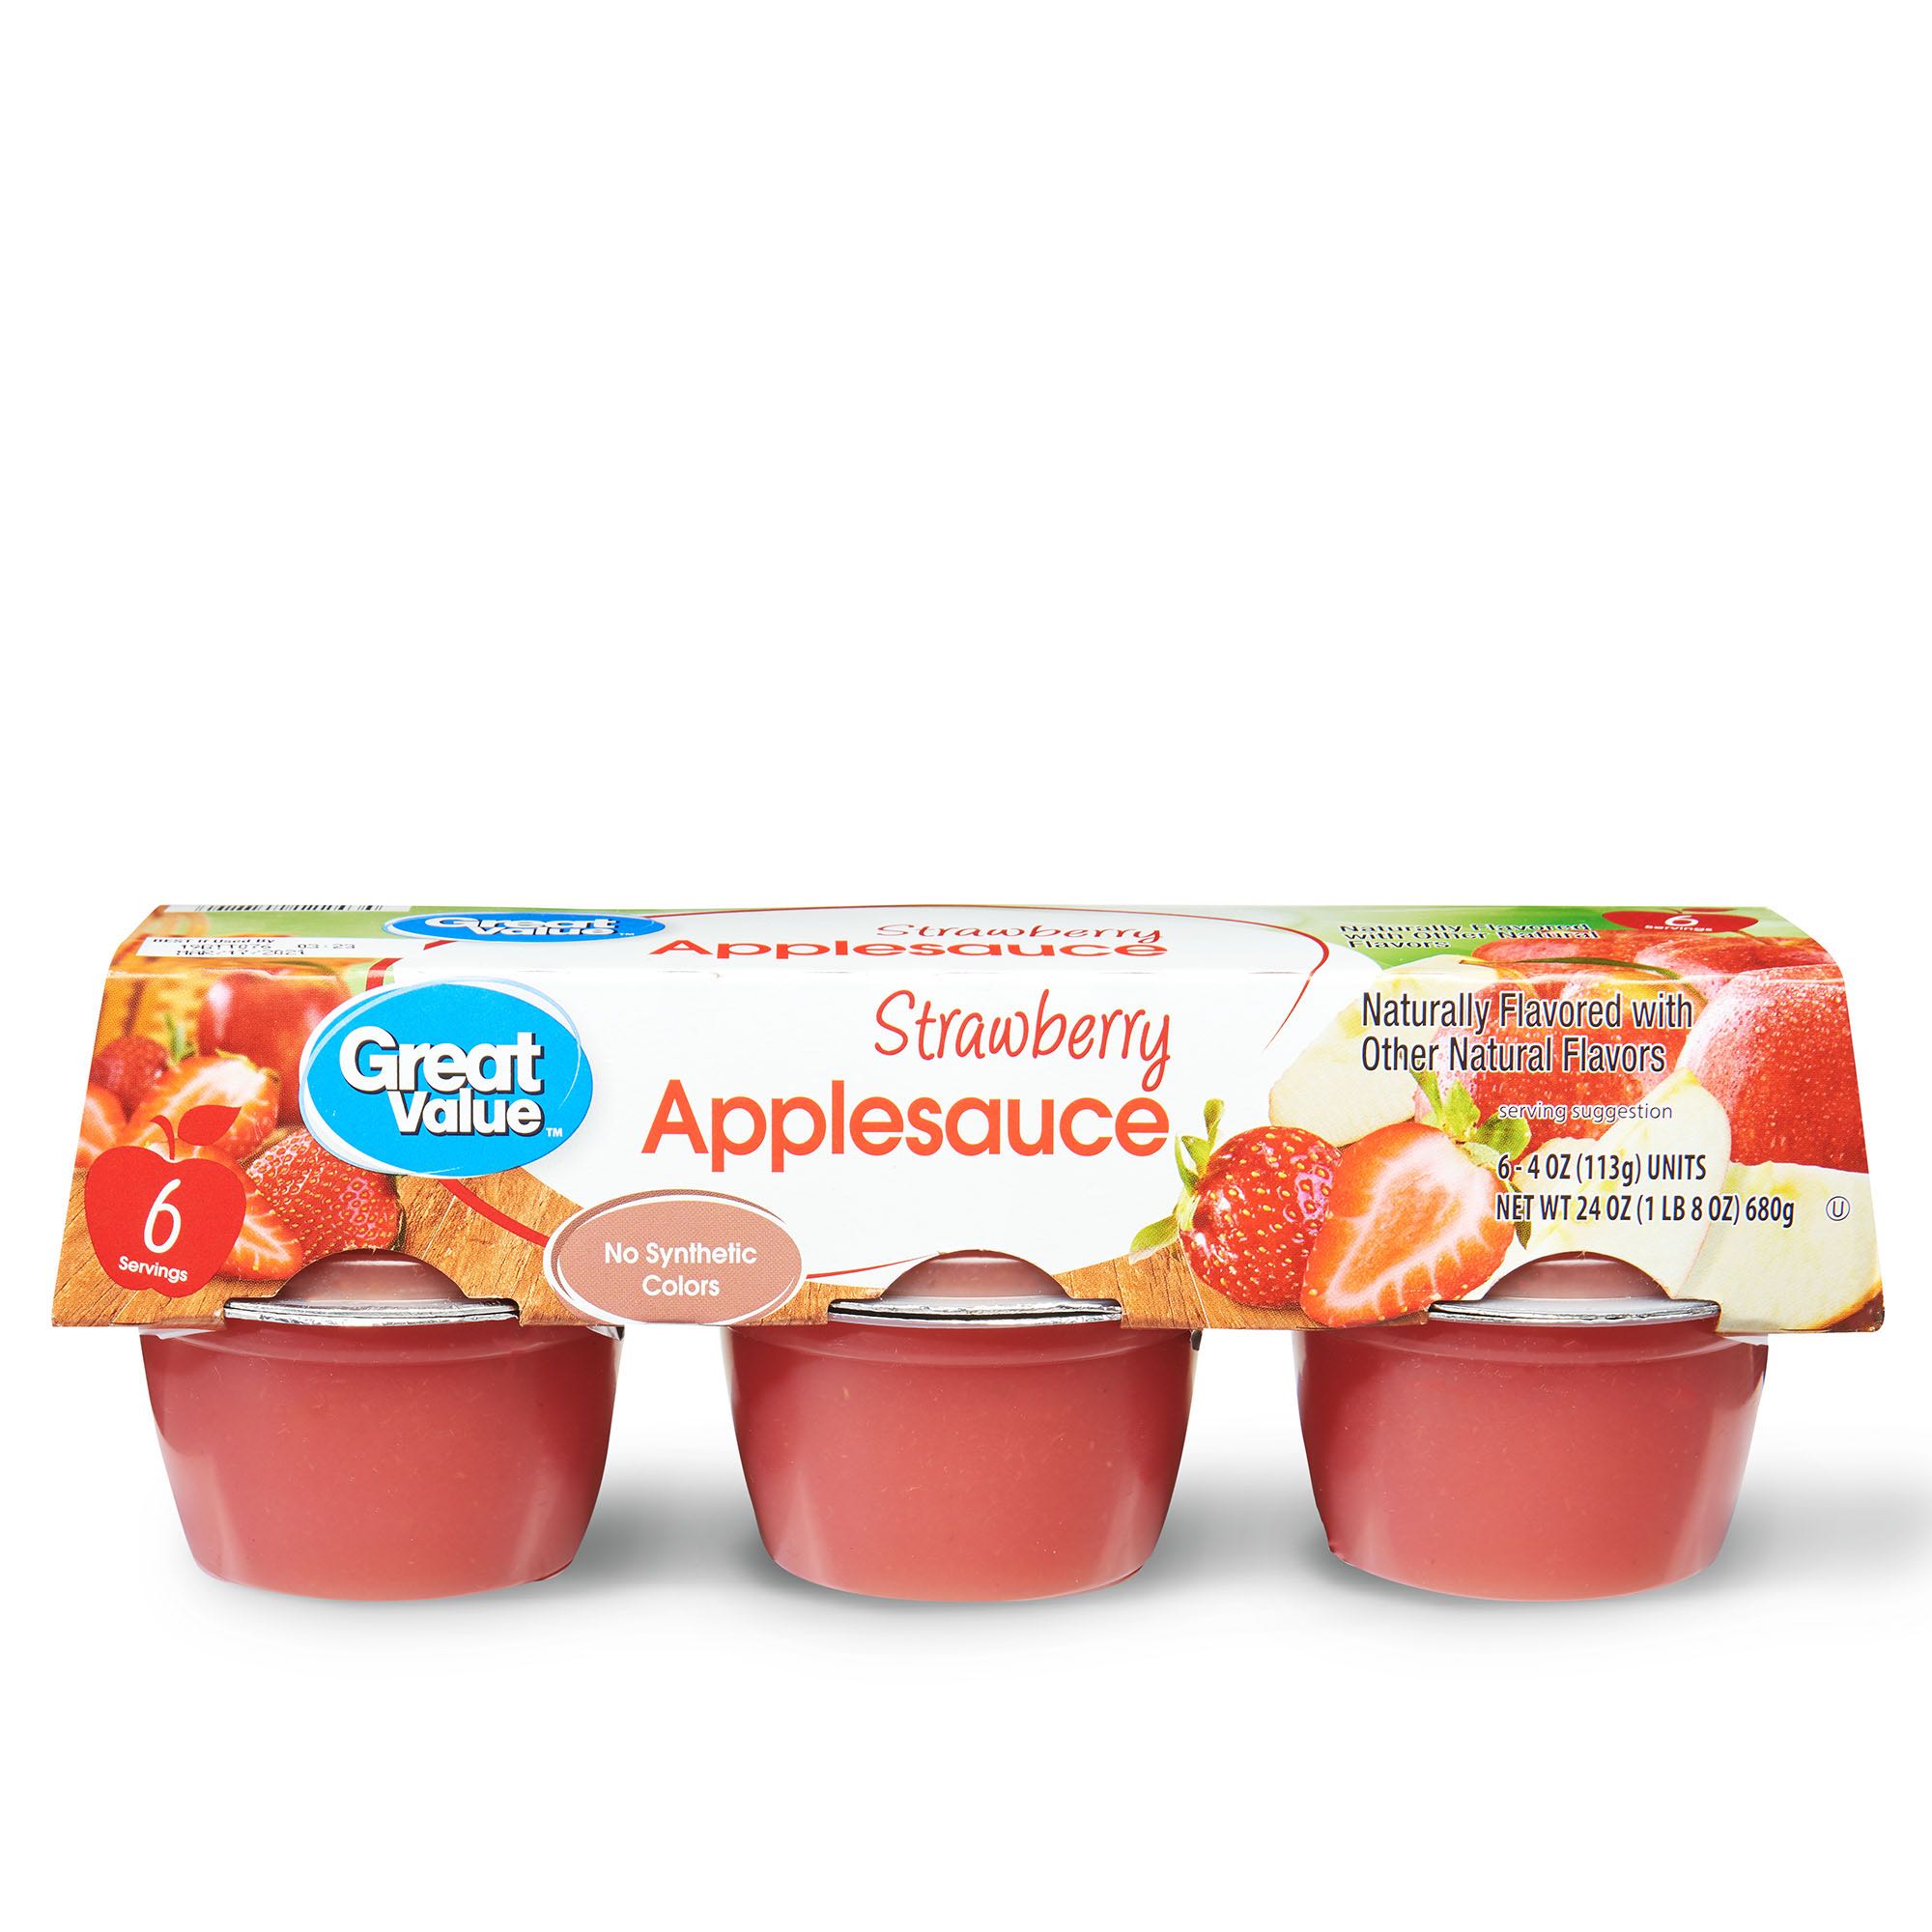 Great Value Strawberry Applesauce Cups, 24 Oz, 6 Count, 3 Pack Image